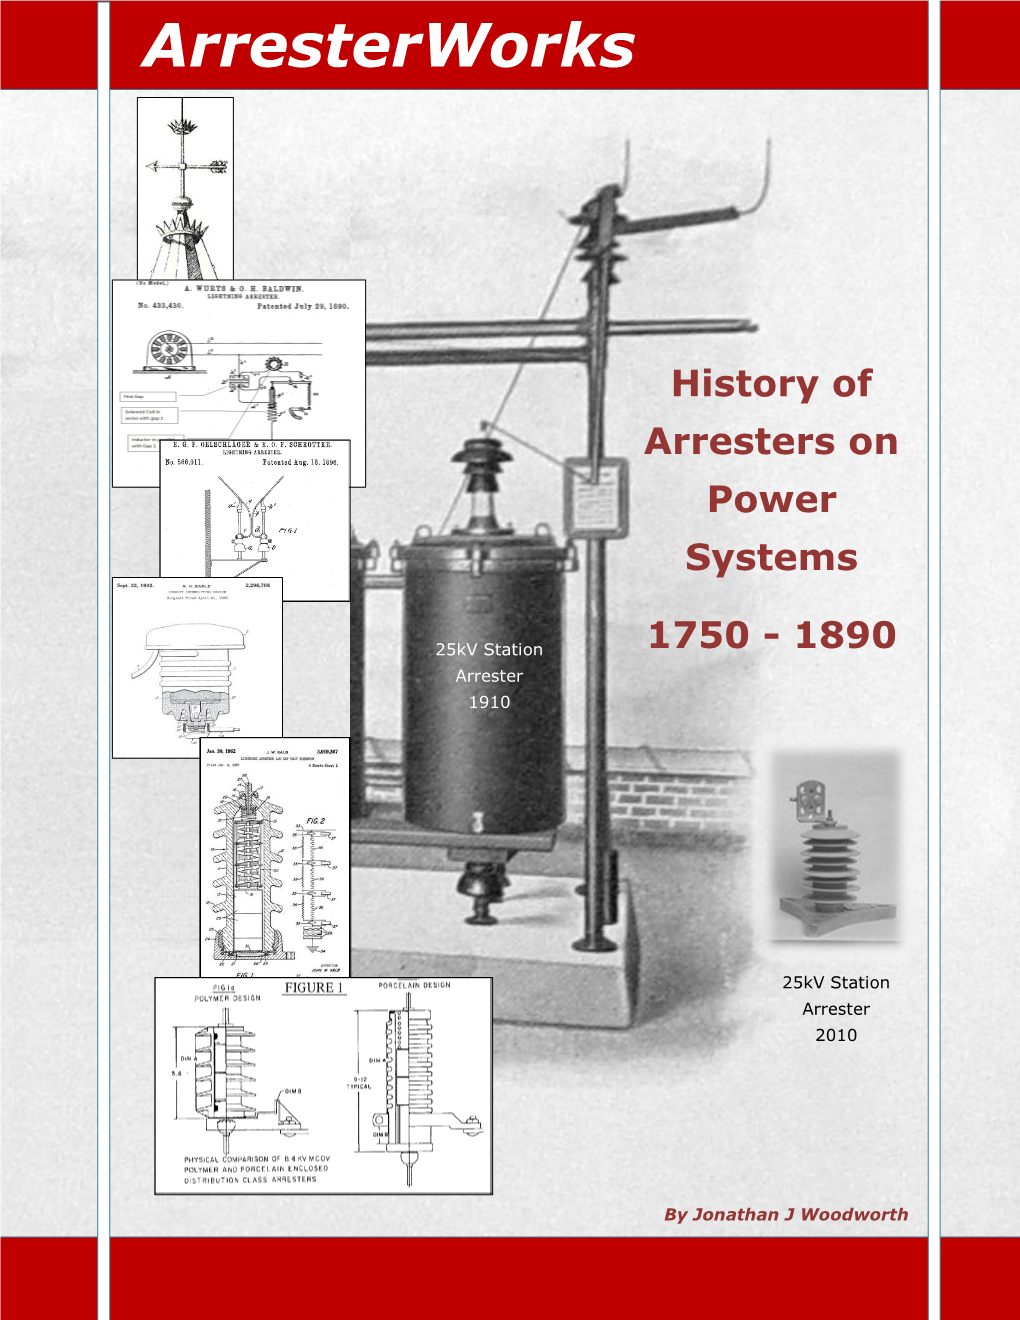 History of Arresters on Power Systems 1750 - 1890